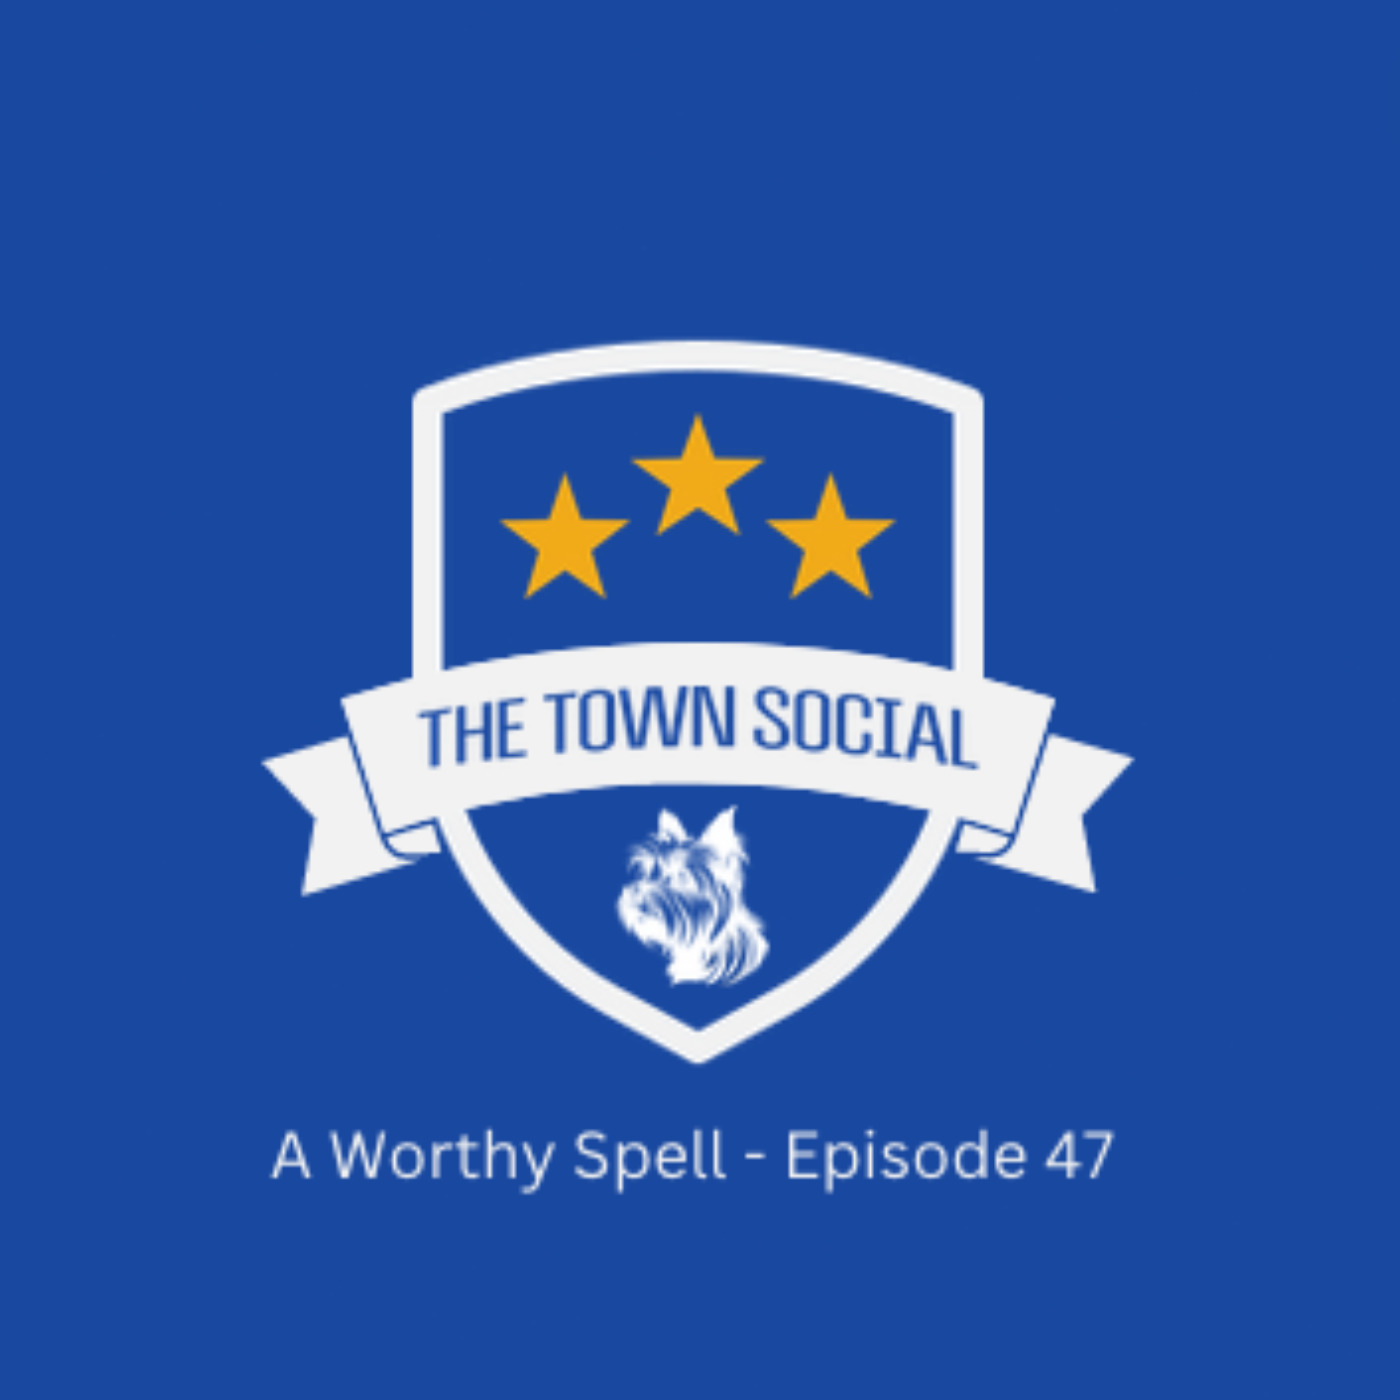 A Worthy Spell - Episode 47